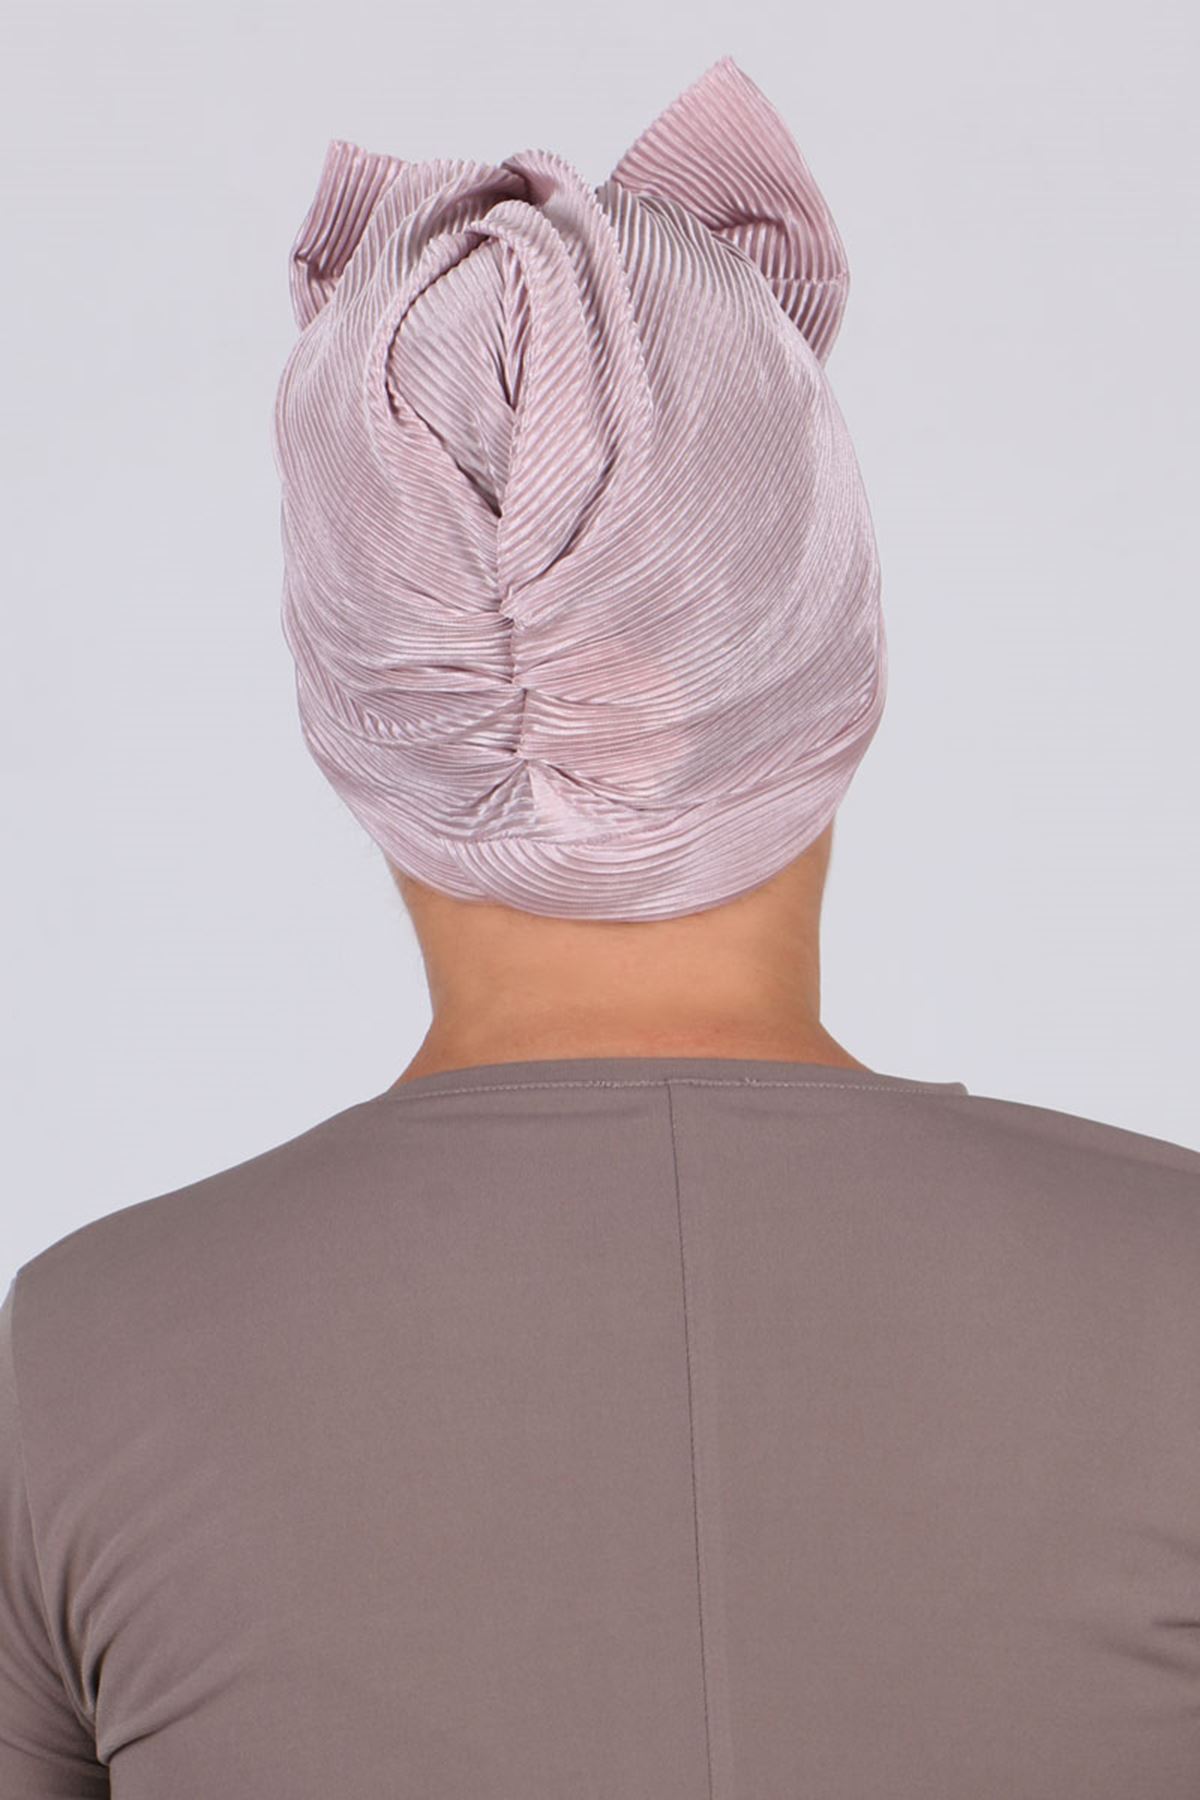 17138 Bonnet with Removable Bow- Dusty Rose